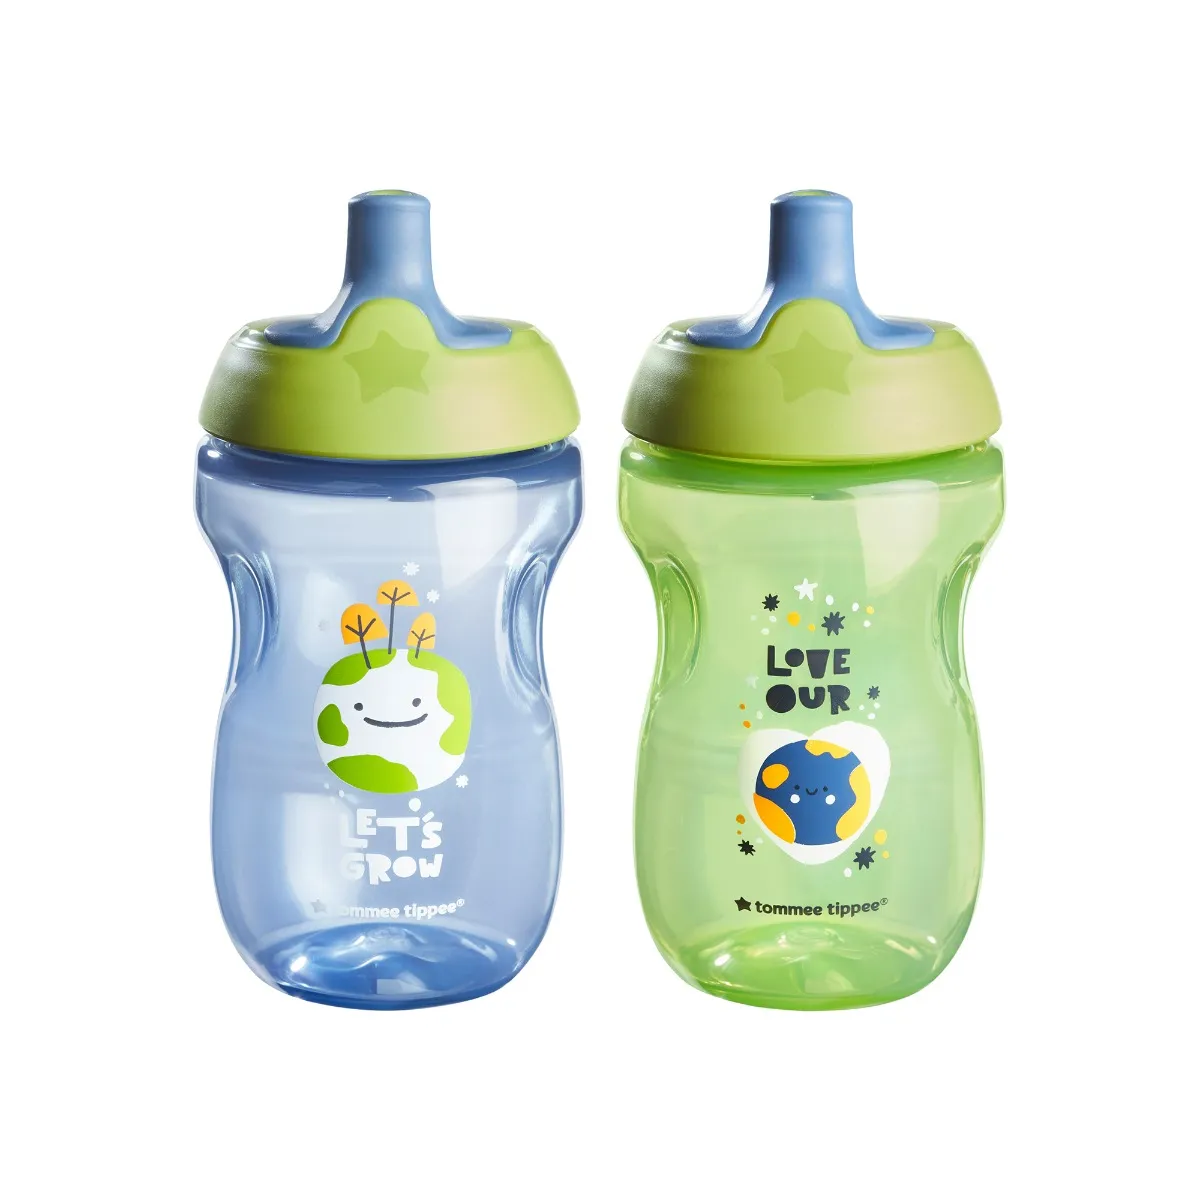 Tommee Tippee Sportee Kids Water Bottle (9oz, 12+ Months, 1 Count)  Antimicrobial Tech | Non-Spill, Shake-Proof